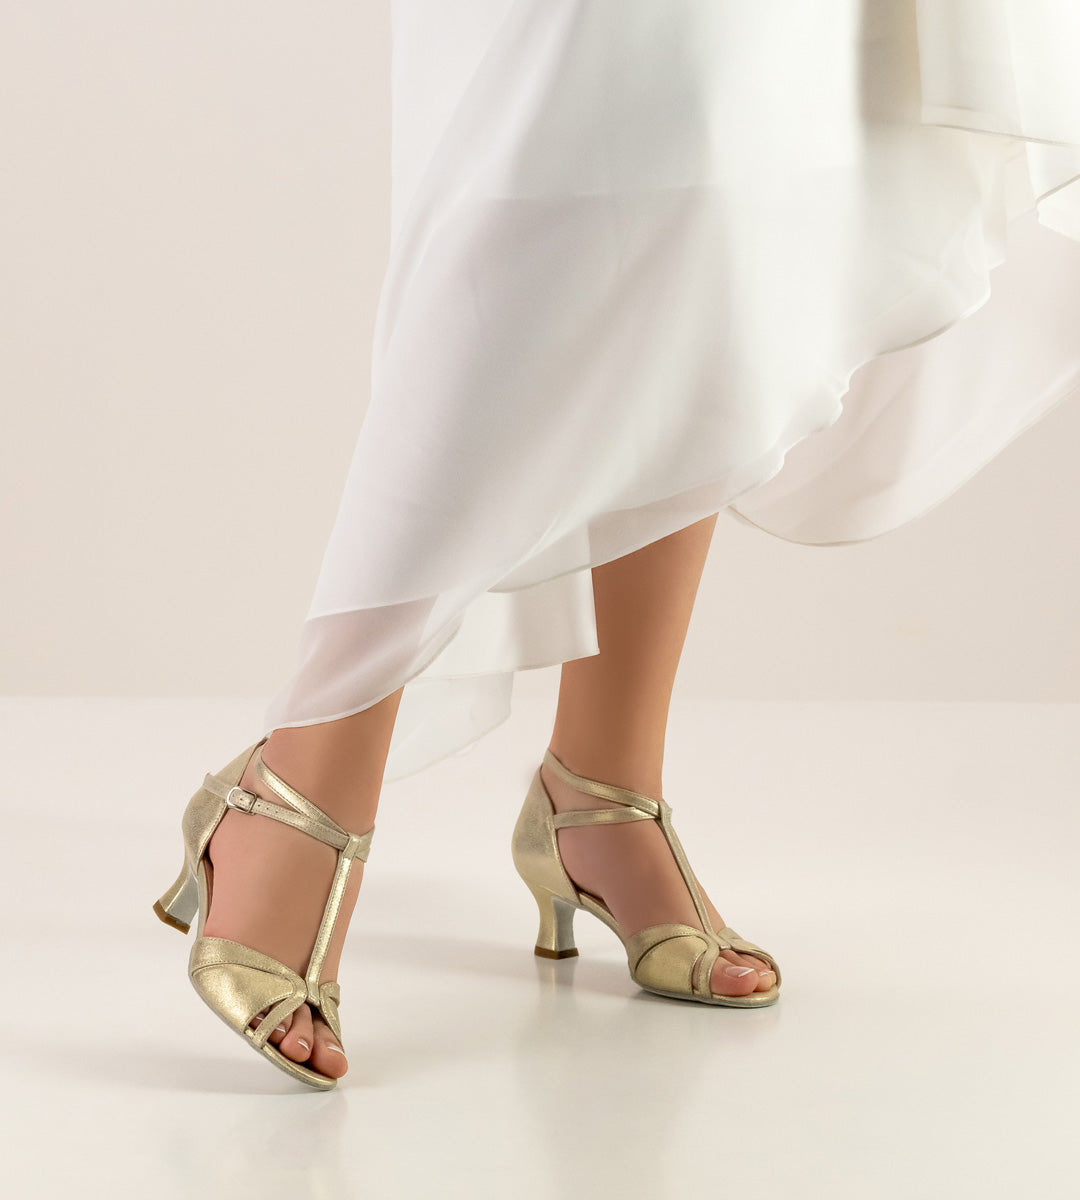 Werner Kern Astrid Open Toe Shimmering Suede Bridal and Latin Dance Shoe Available in Silver and Gold